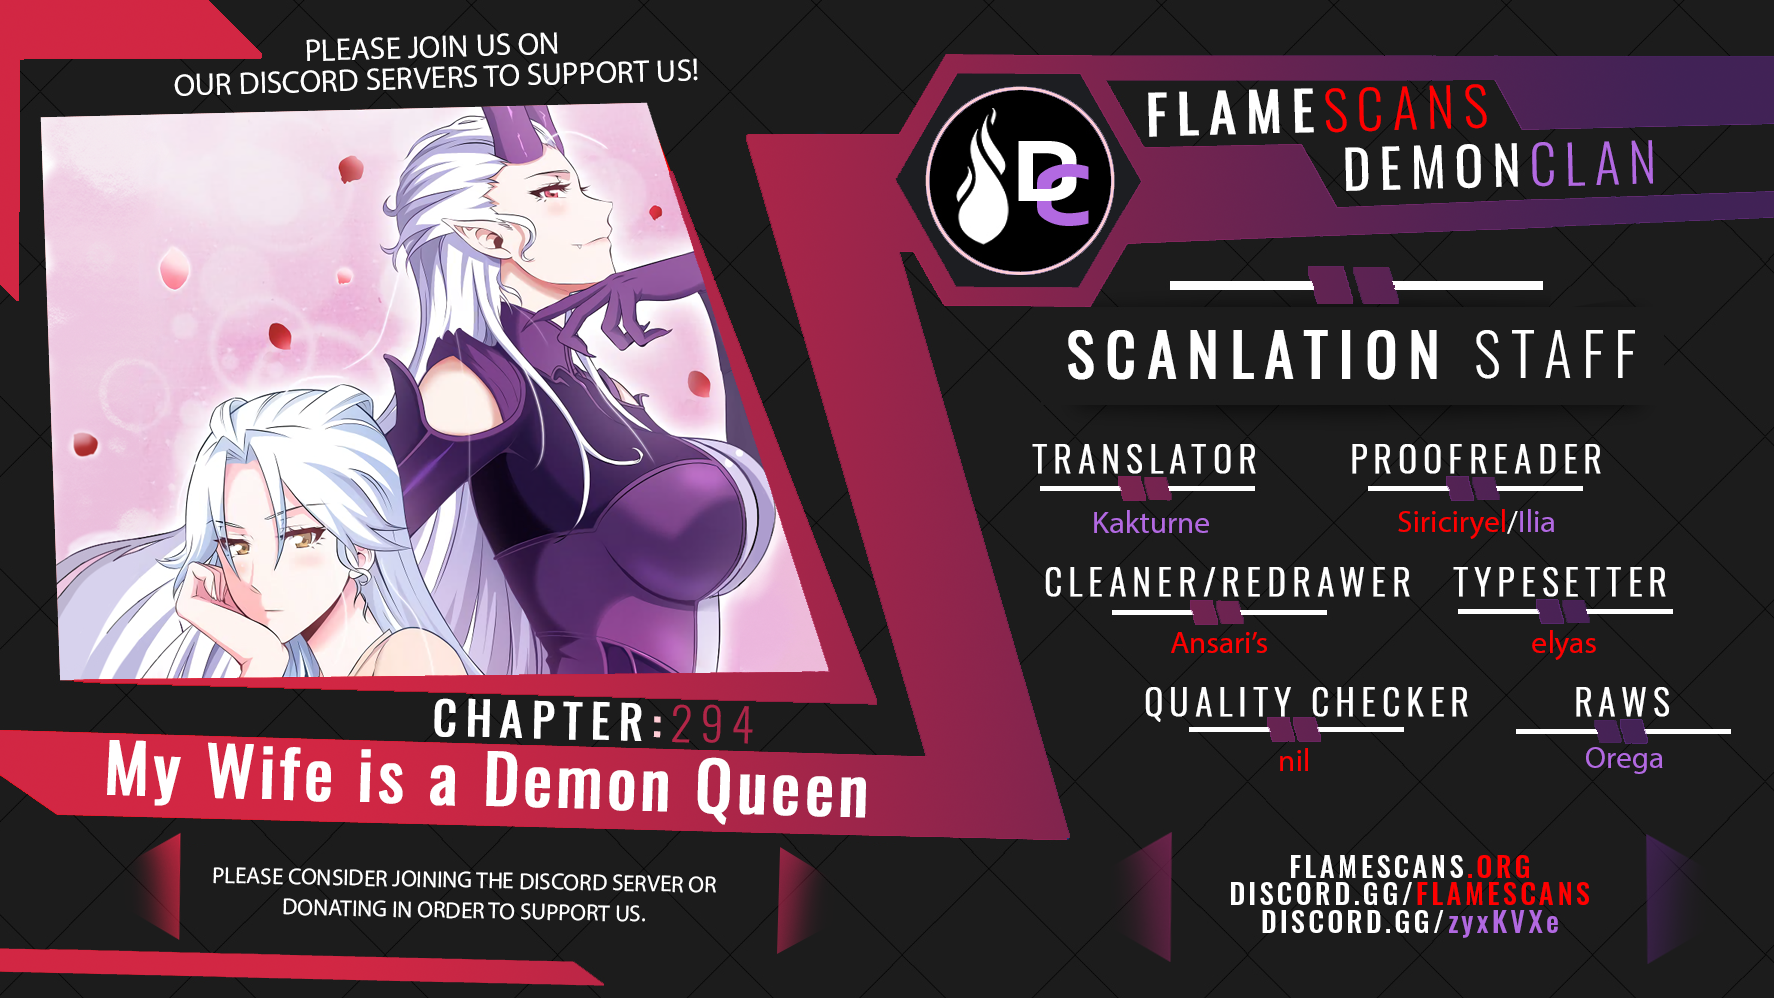 My Wife is a Demon Queen - Chapter 10487 - Image 1